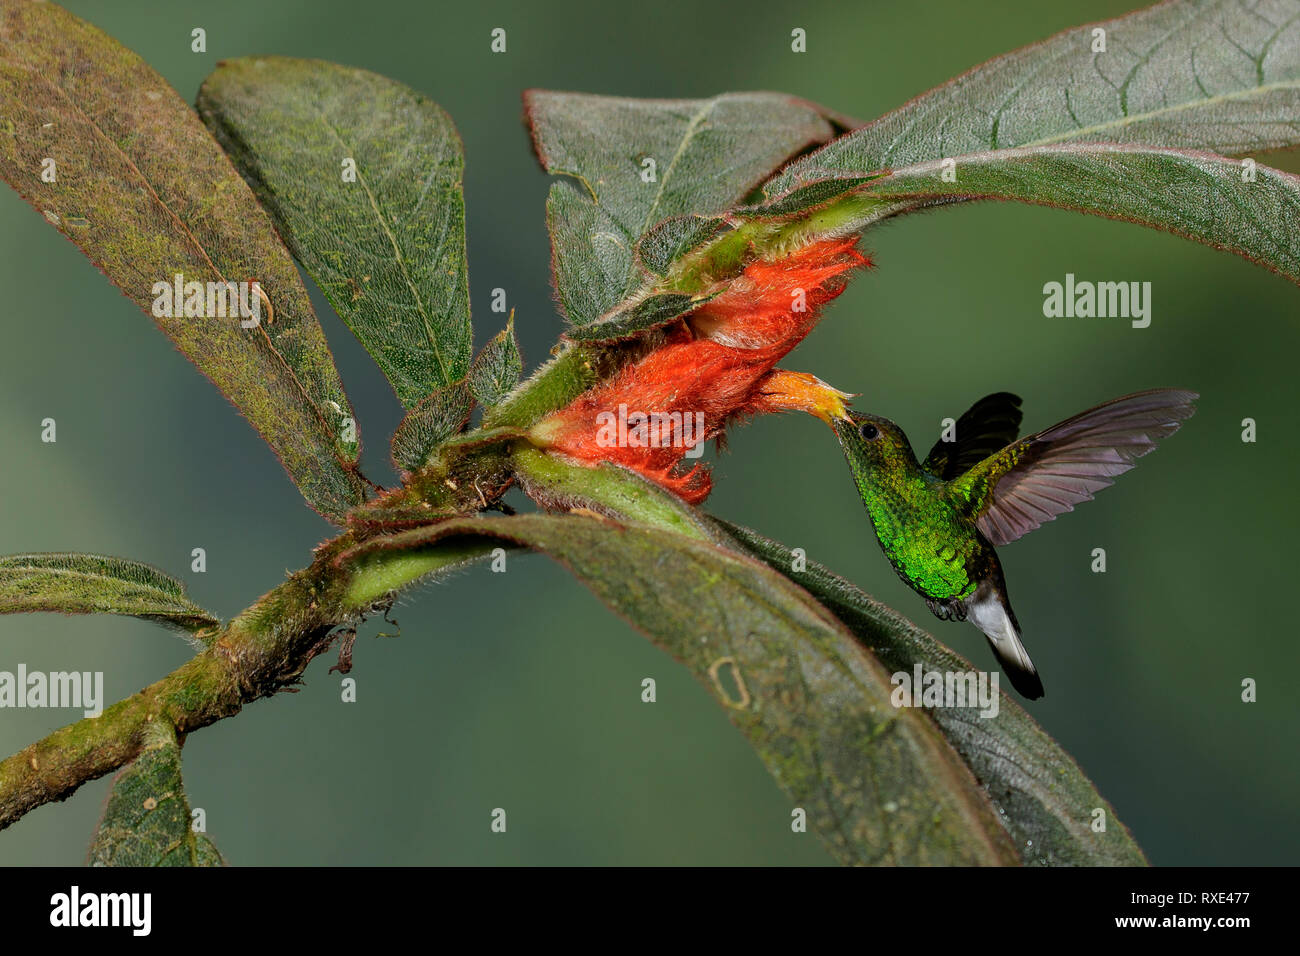 Coppery-headed Emerald (Elvira cupreiceps)  feeding at a tropical flower in Costa Rica. Stock Photo